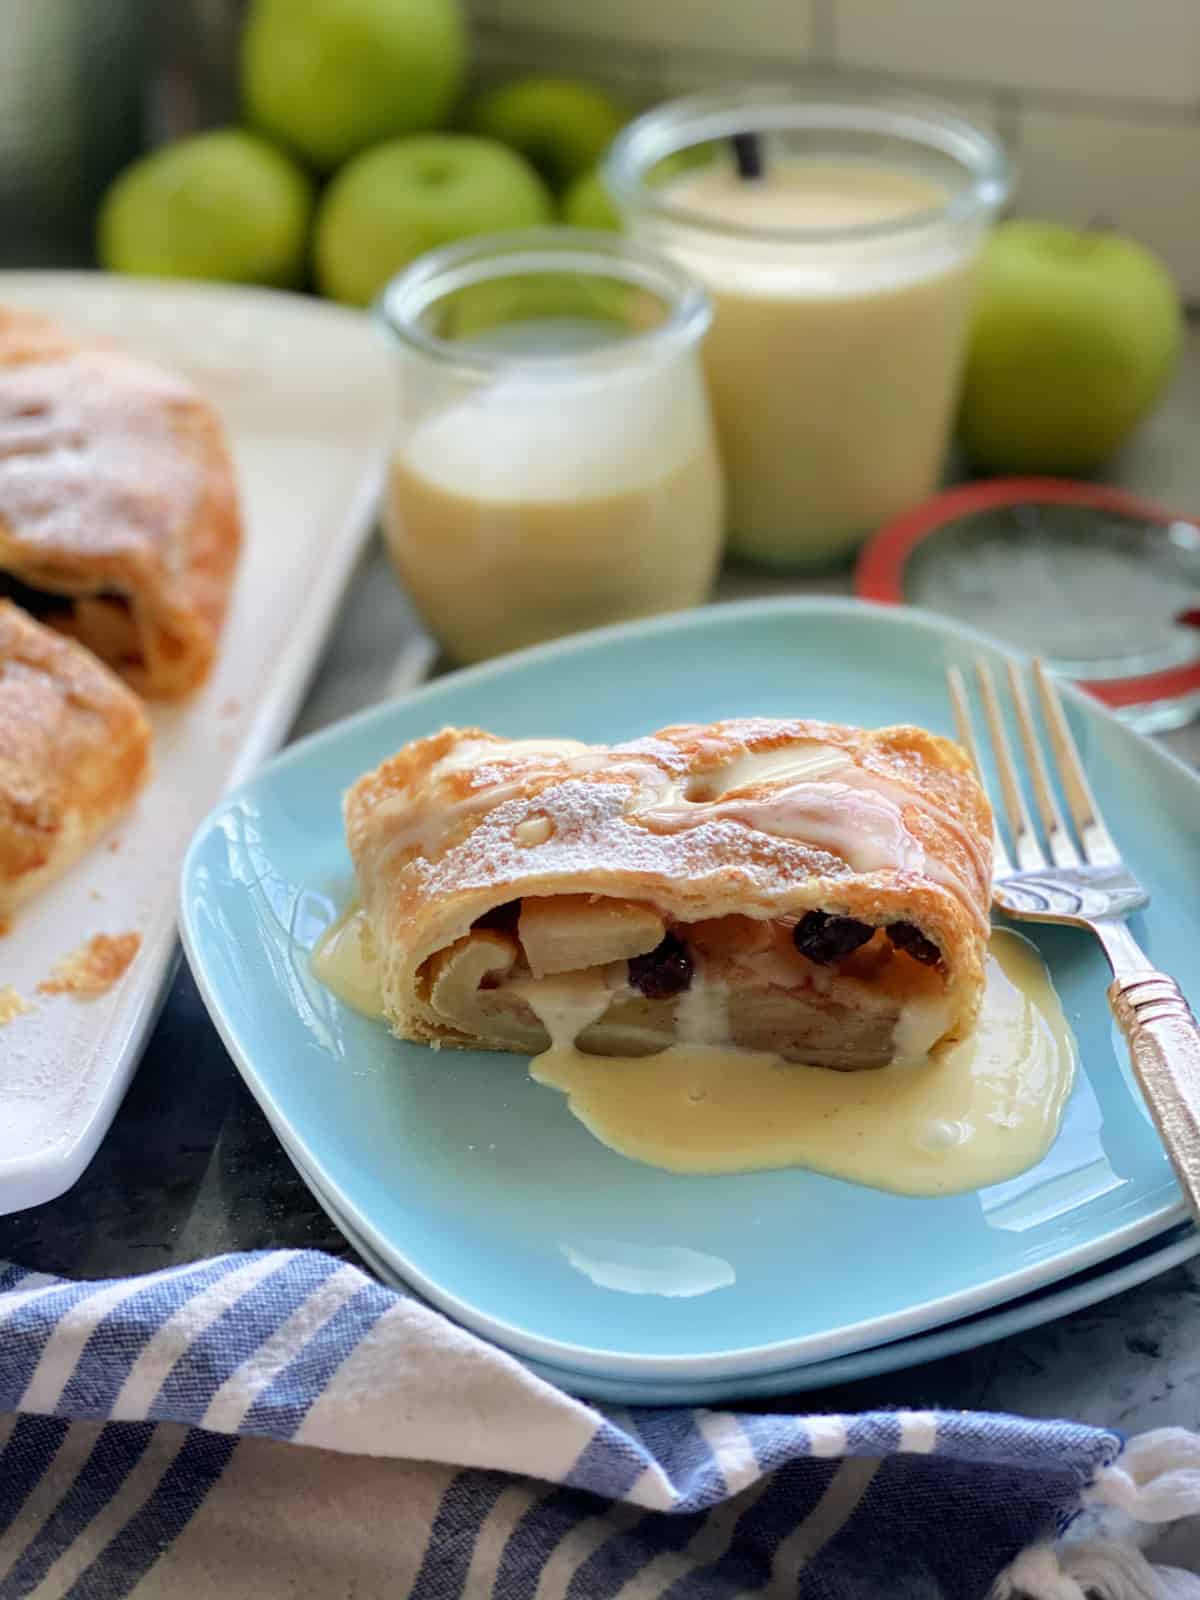 Two square light blue plates with a slice of Apple Strudel with vanila sauce.